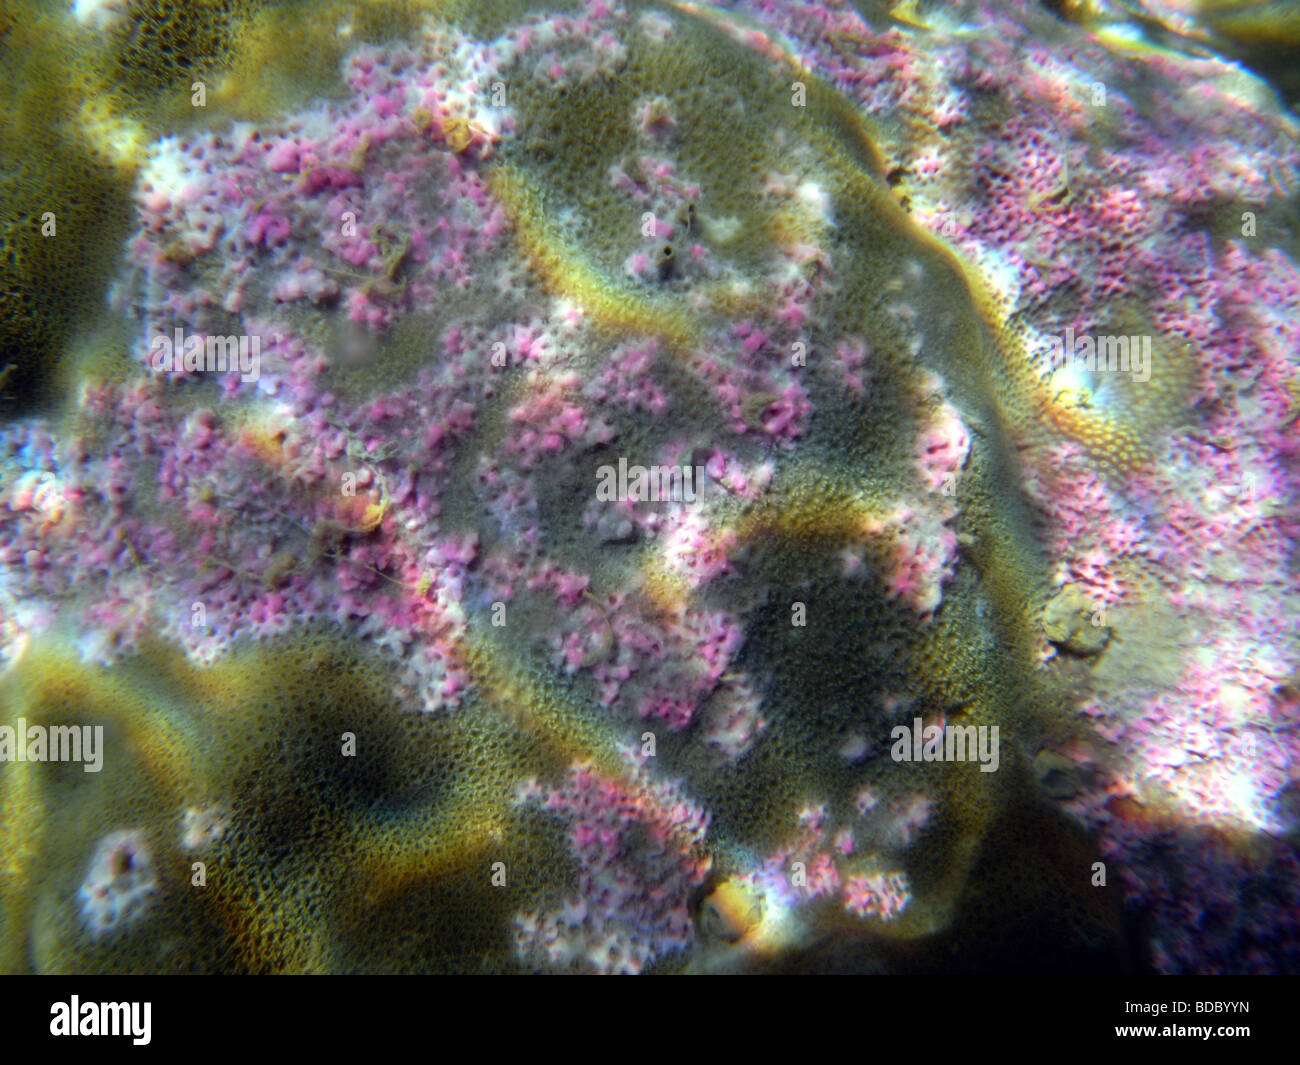 Coral colony (Porites compressa) infected by metacercariae of the digenetic trematode Podocotyloides stenometra Stock Photo